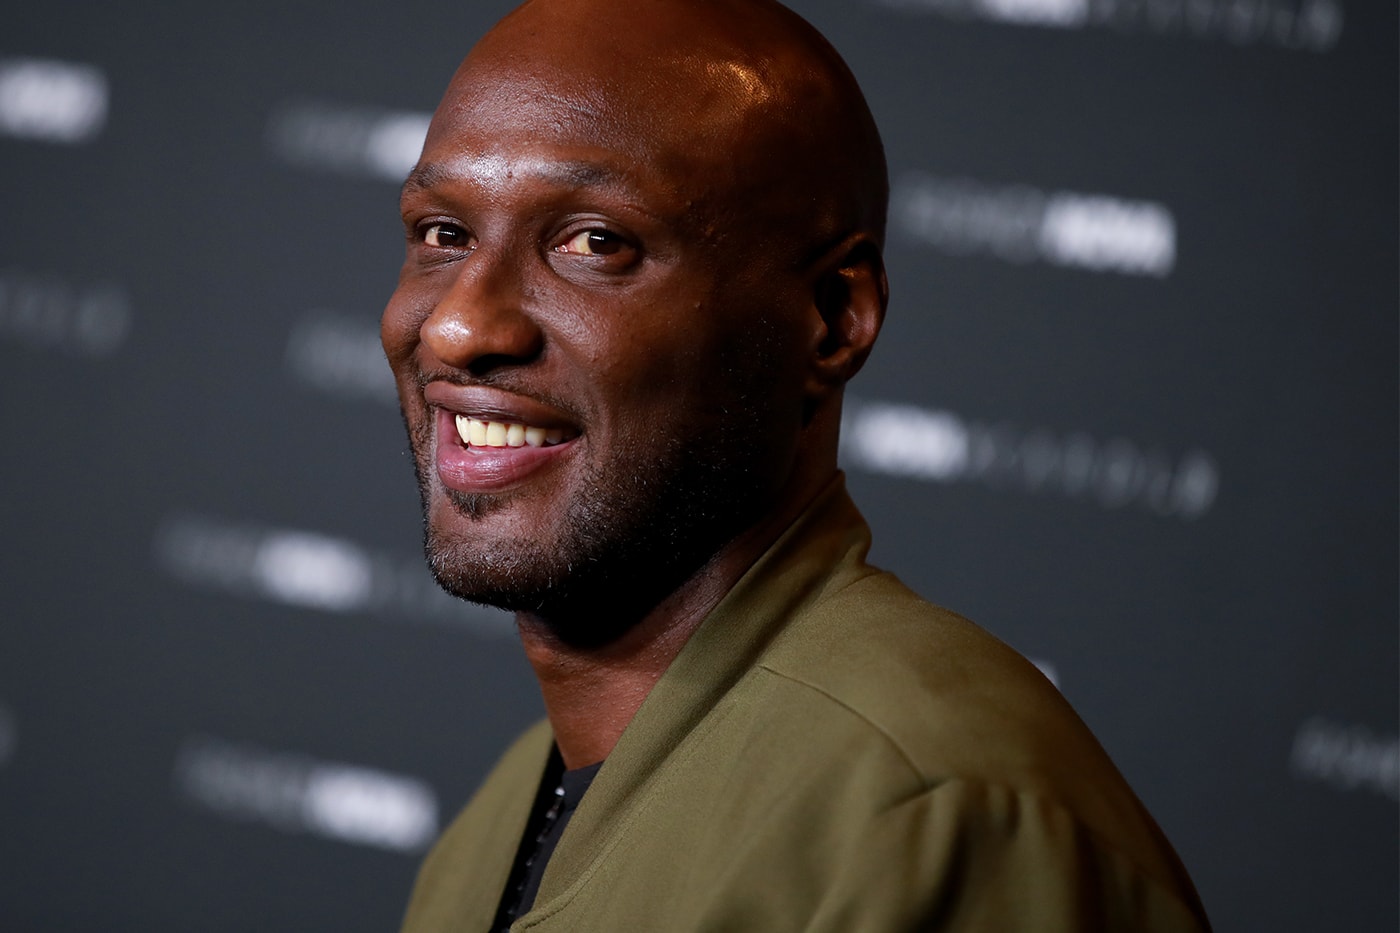 Lamar Odom and Aaron Carter Are Set for a Celebrity Boxing Match In Atlantic City NBA Basketball Nick Carter Pop Star Celebrity TMZ